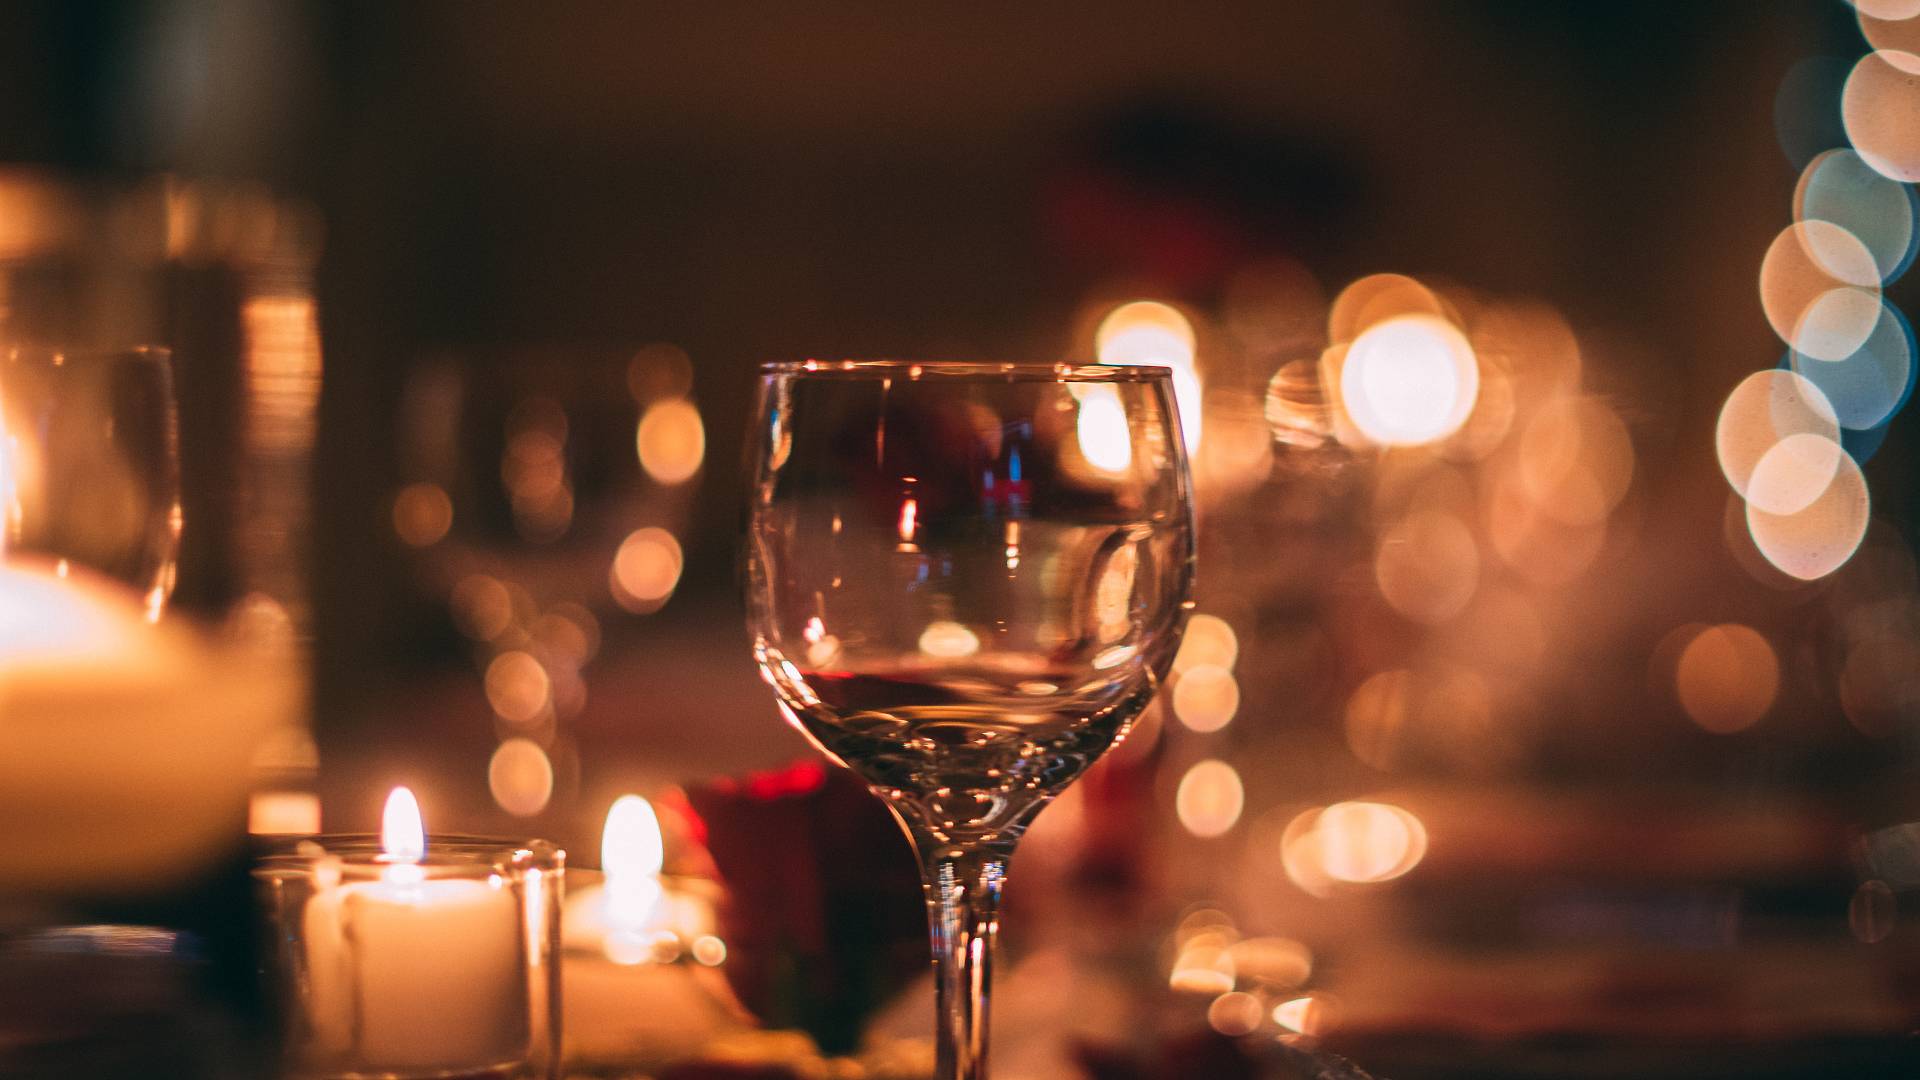 Candlelight and wine glass at night